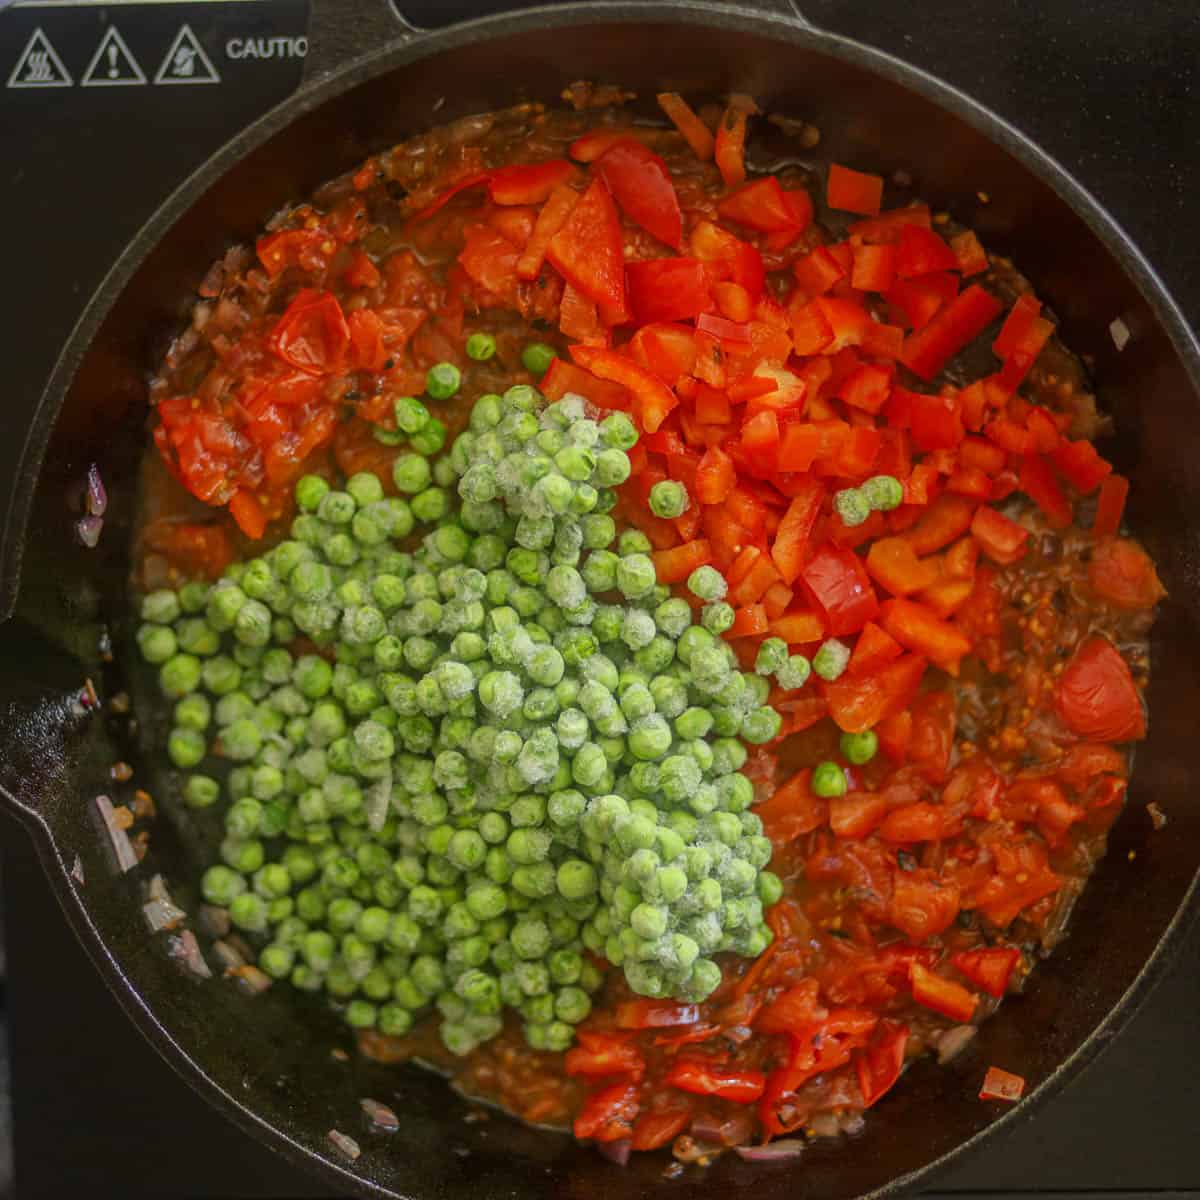 Add peas and bell peppers and saute for 1-2 minutes.